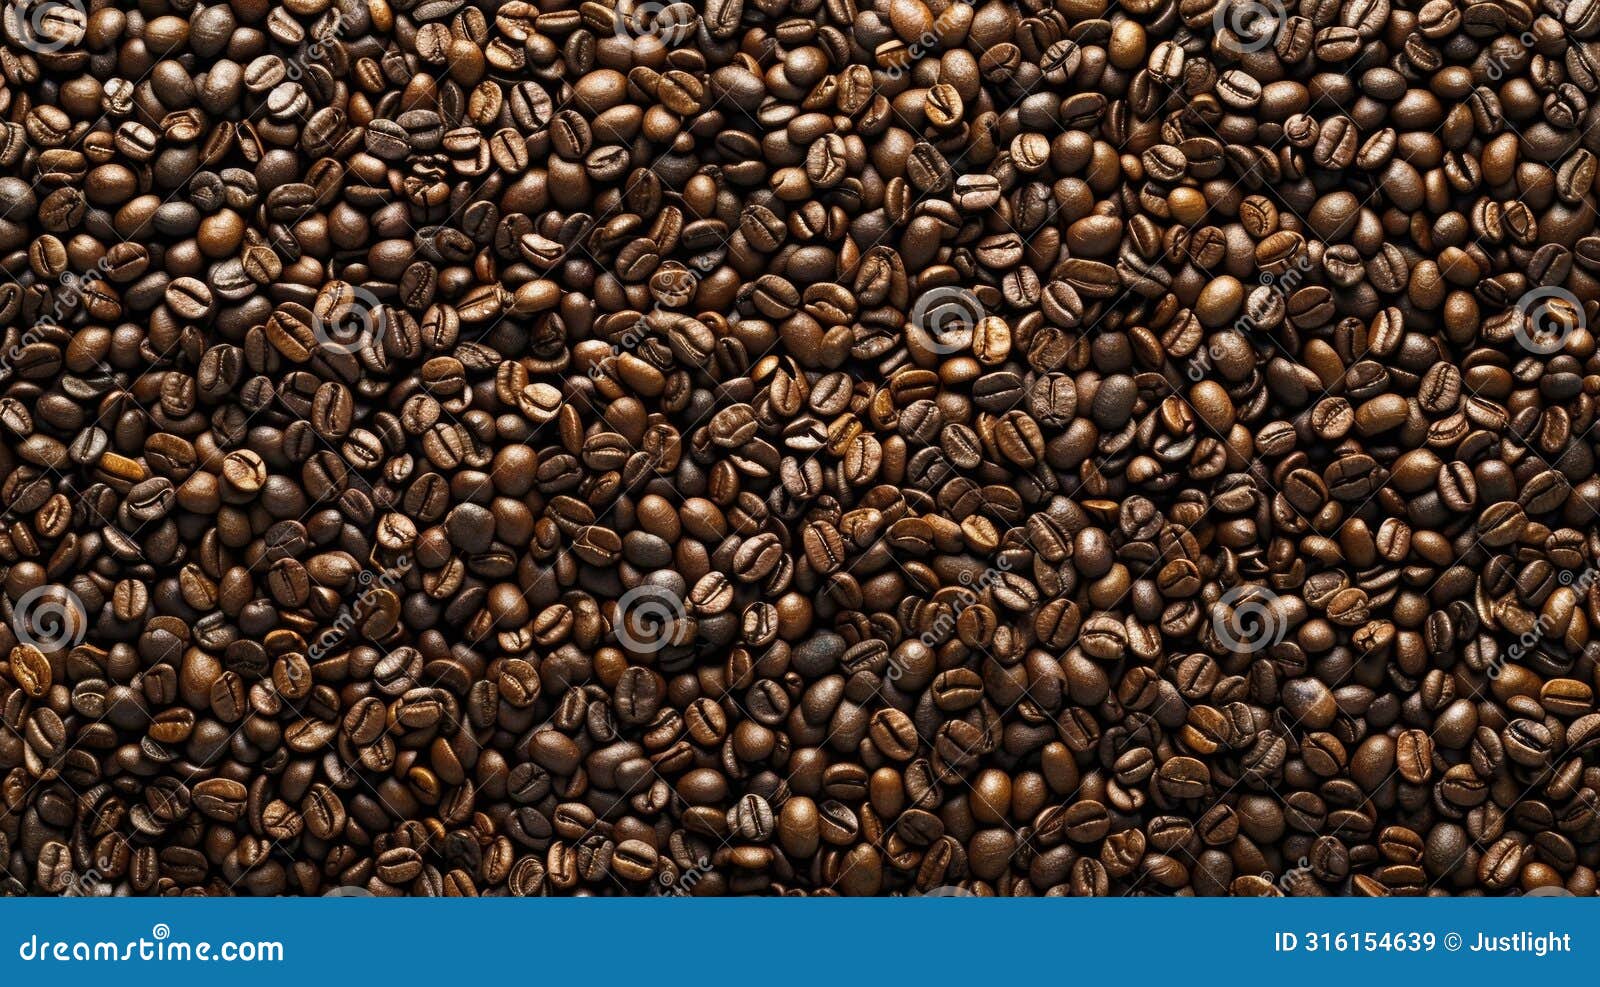 blurred backdrop featuring tered coffee beans in a rich earthy color palette evoking the natural origins of aromatic